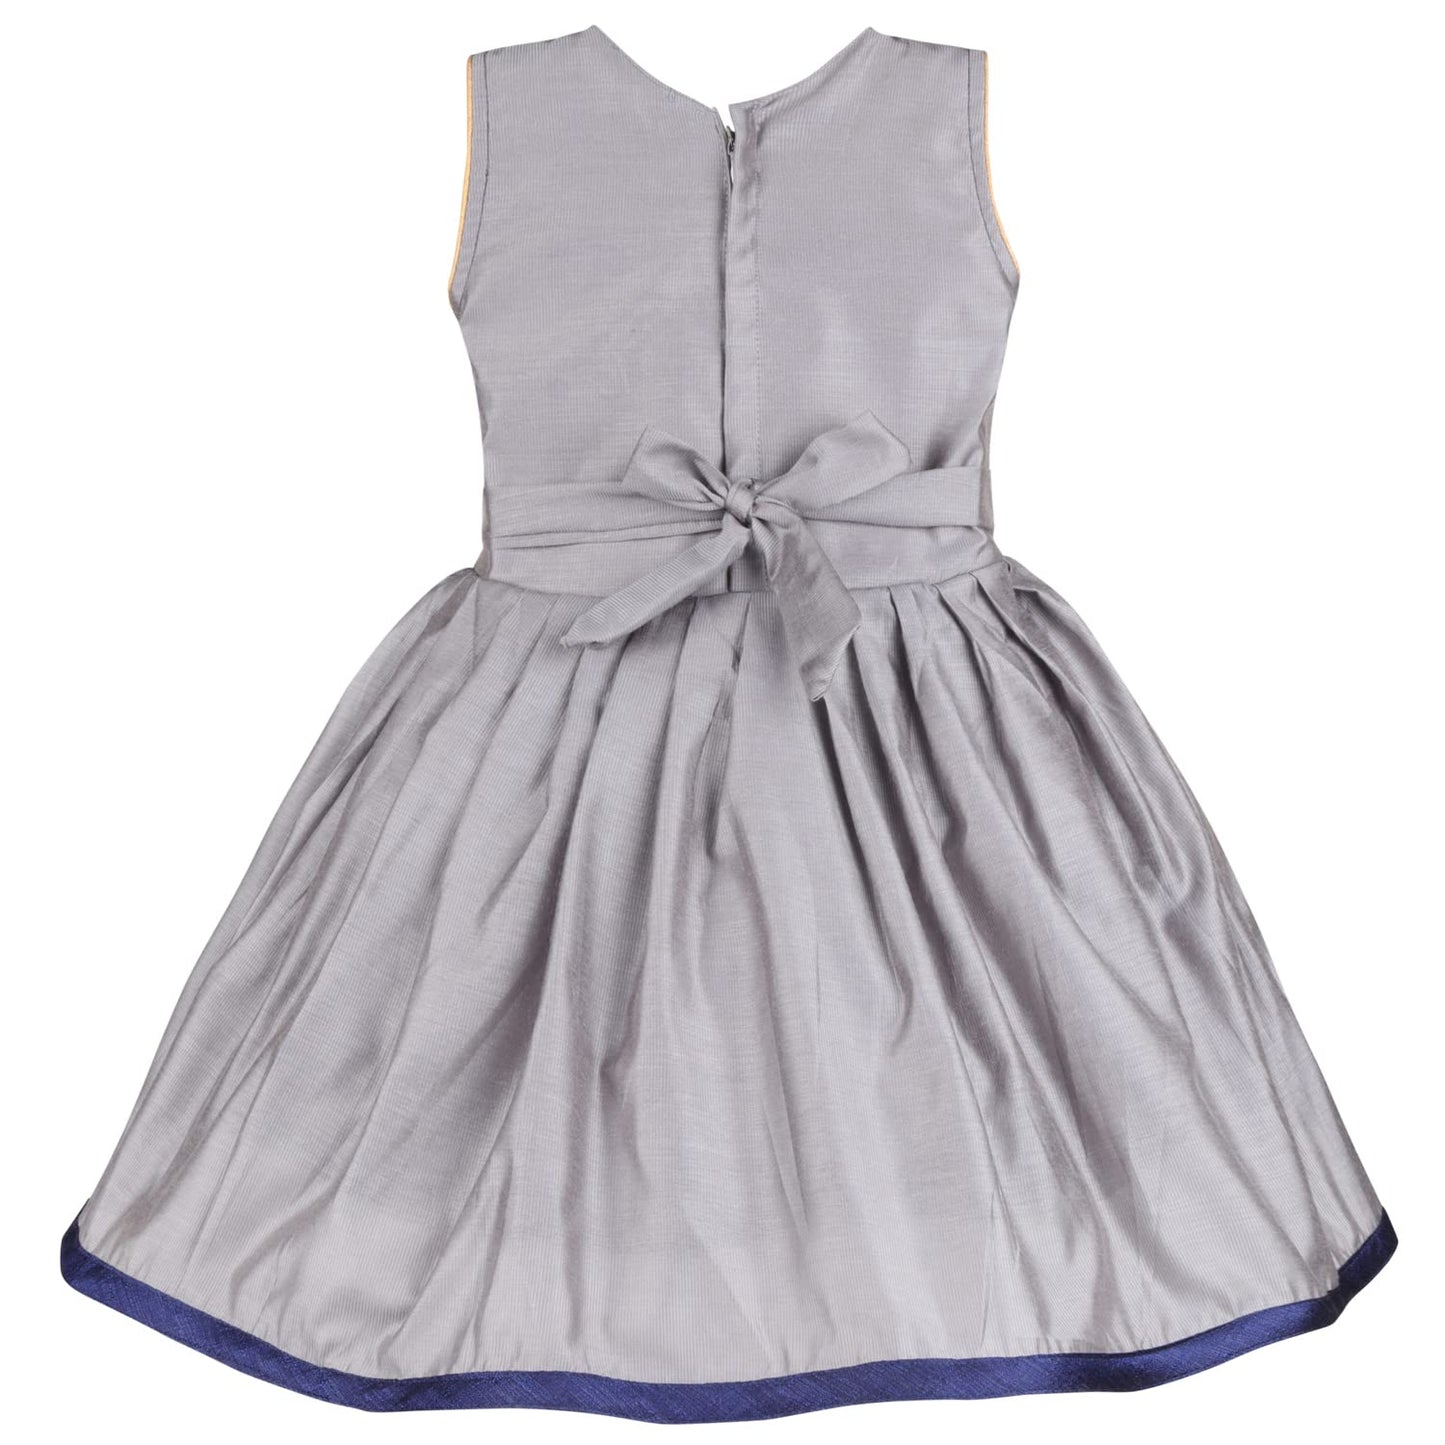 Girls Embroidered Partywear frocks